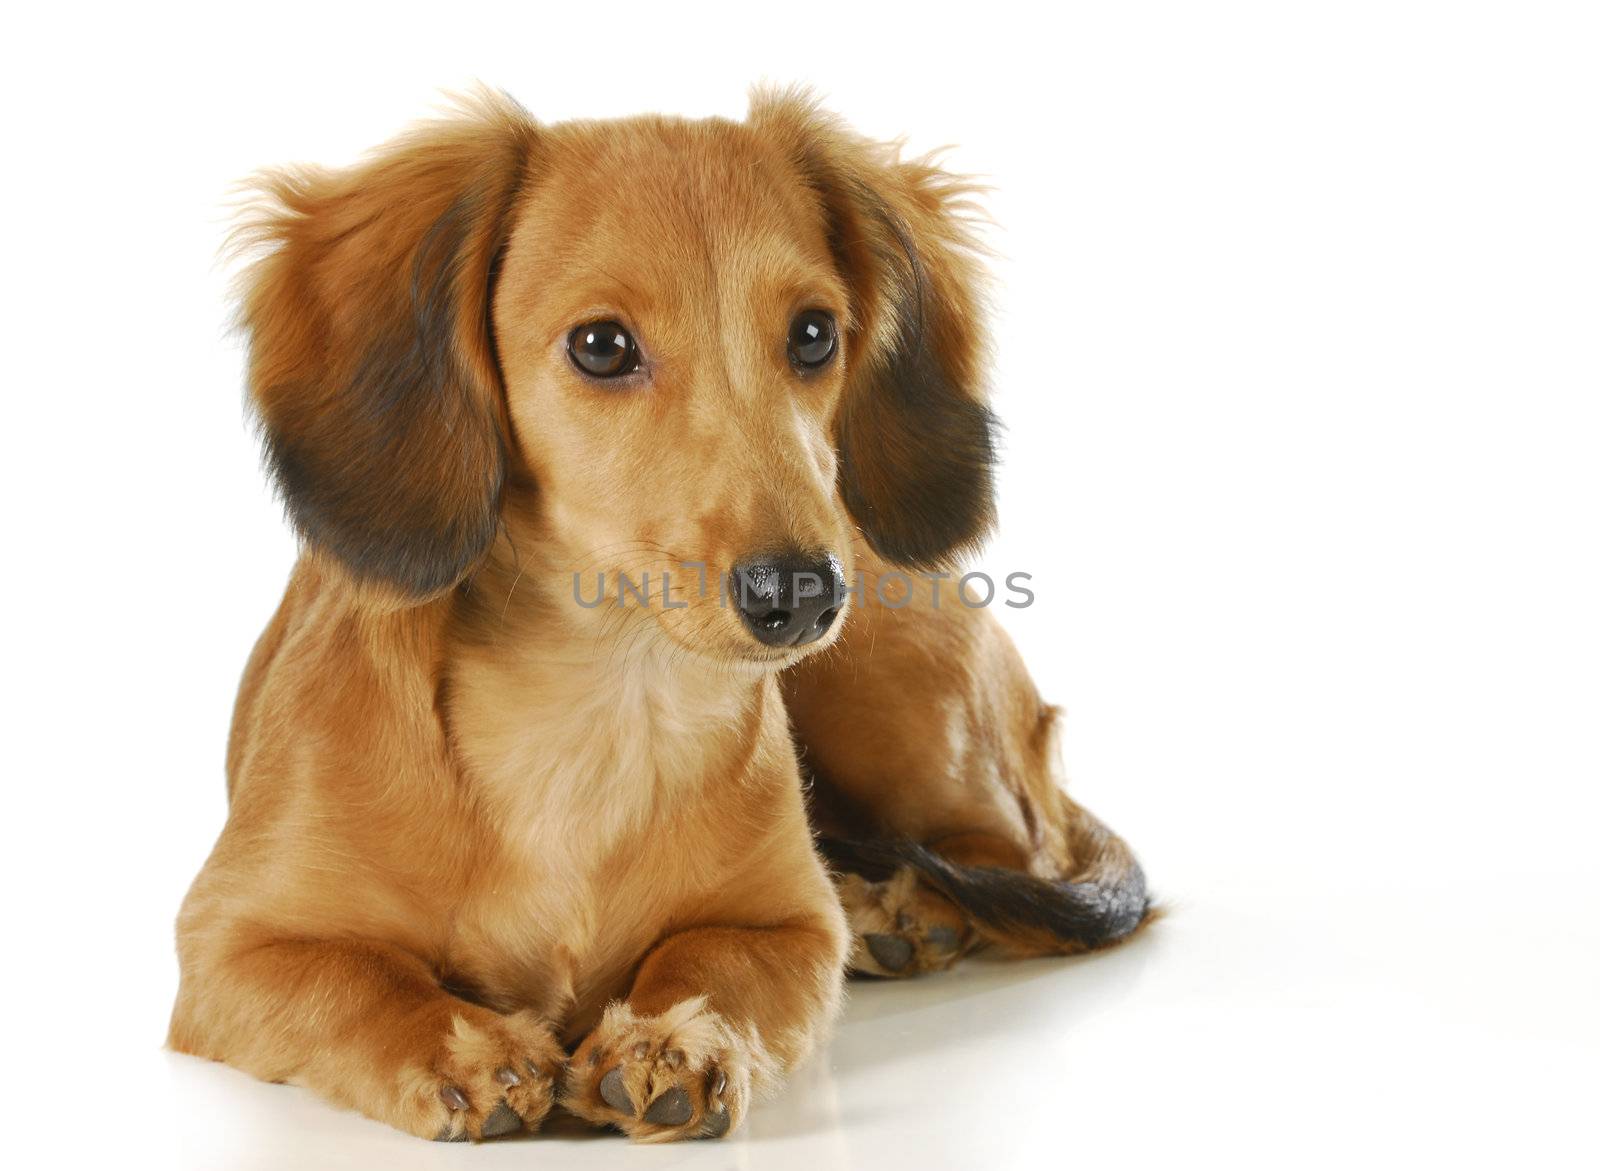 long haired dachshund by willeecole123